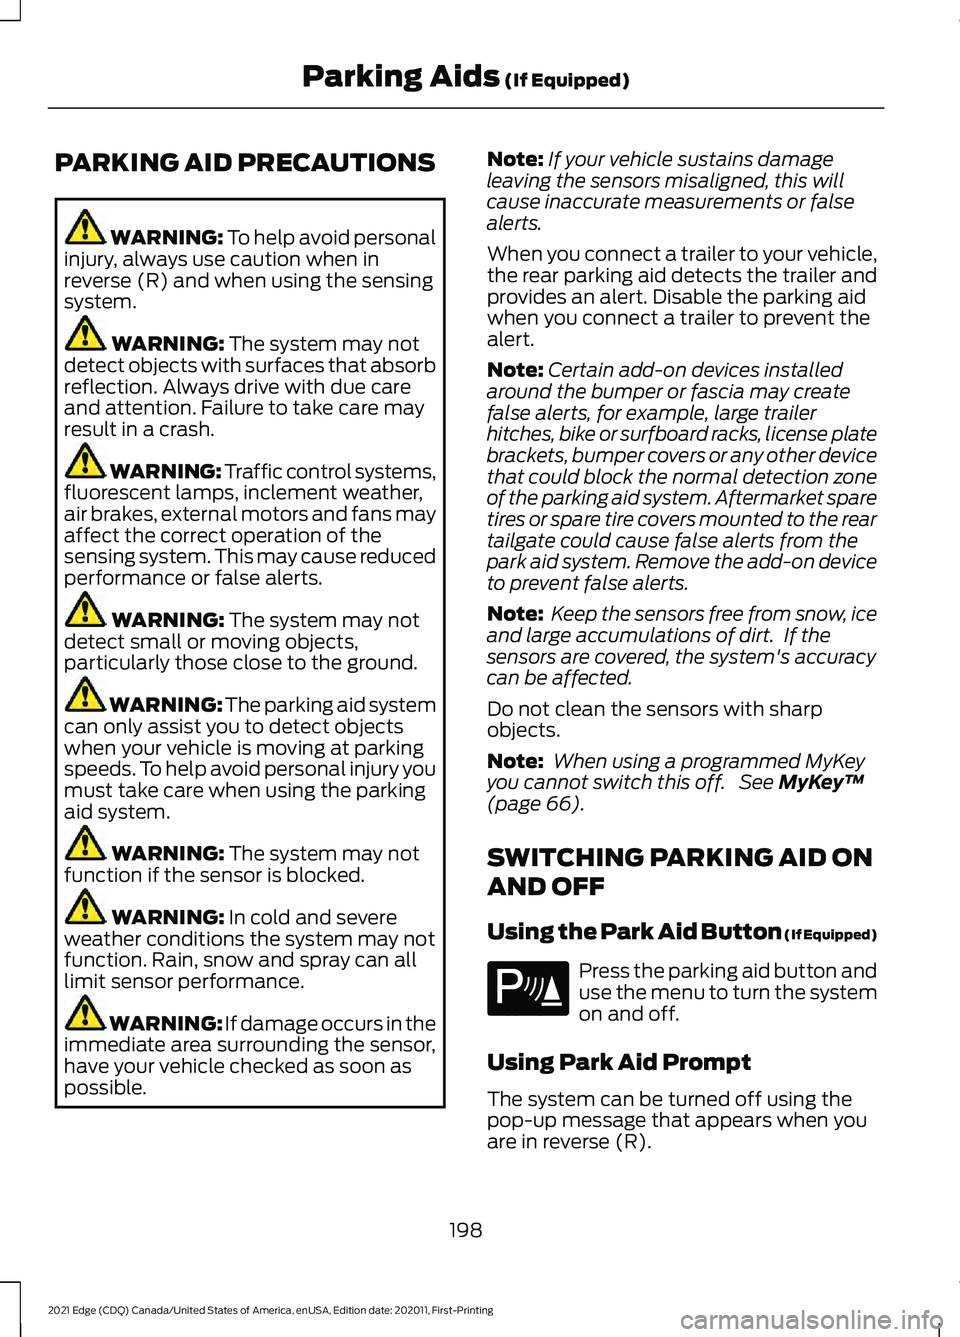 FORD EDGE 2021  Owners Manual PARKING AID PRECAUTIONS
WARNING: To help avoid personal
injury, always use caution when in
reverse (R) and when using the sensing
system. WARNING: 
The system may not
detect objects with surfaces that